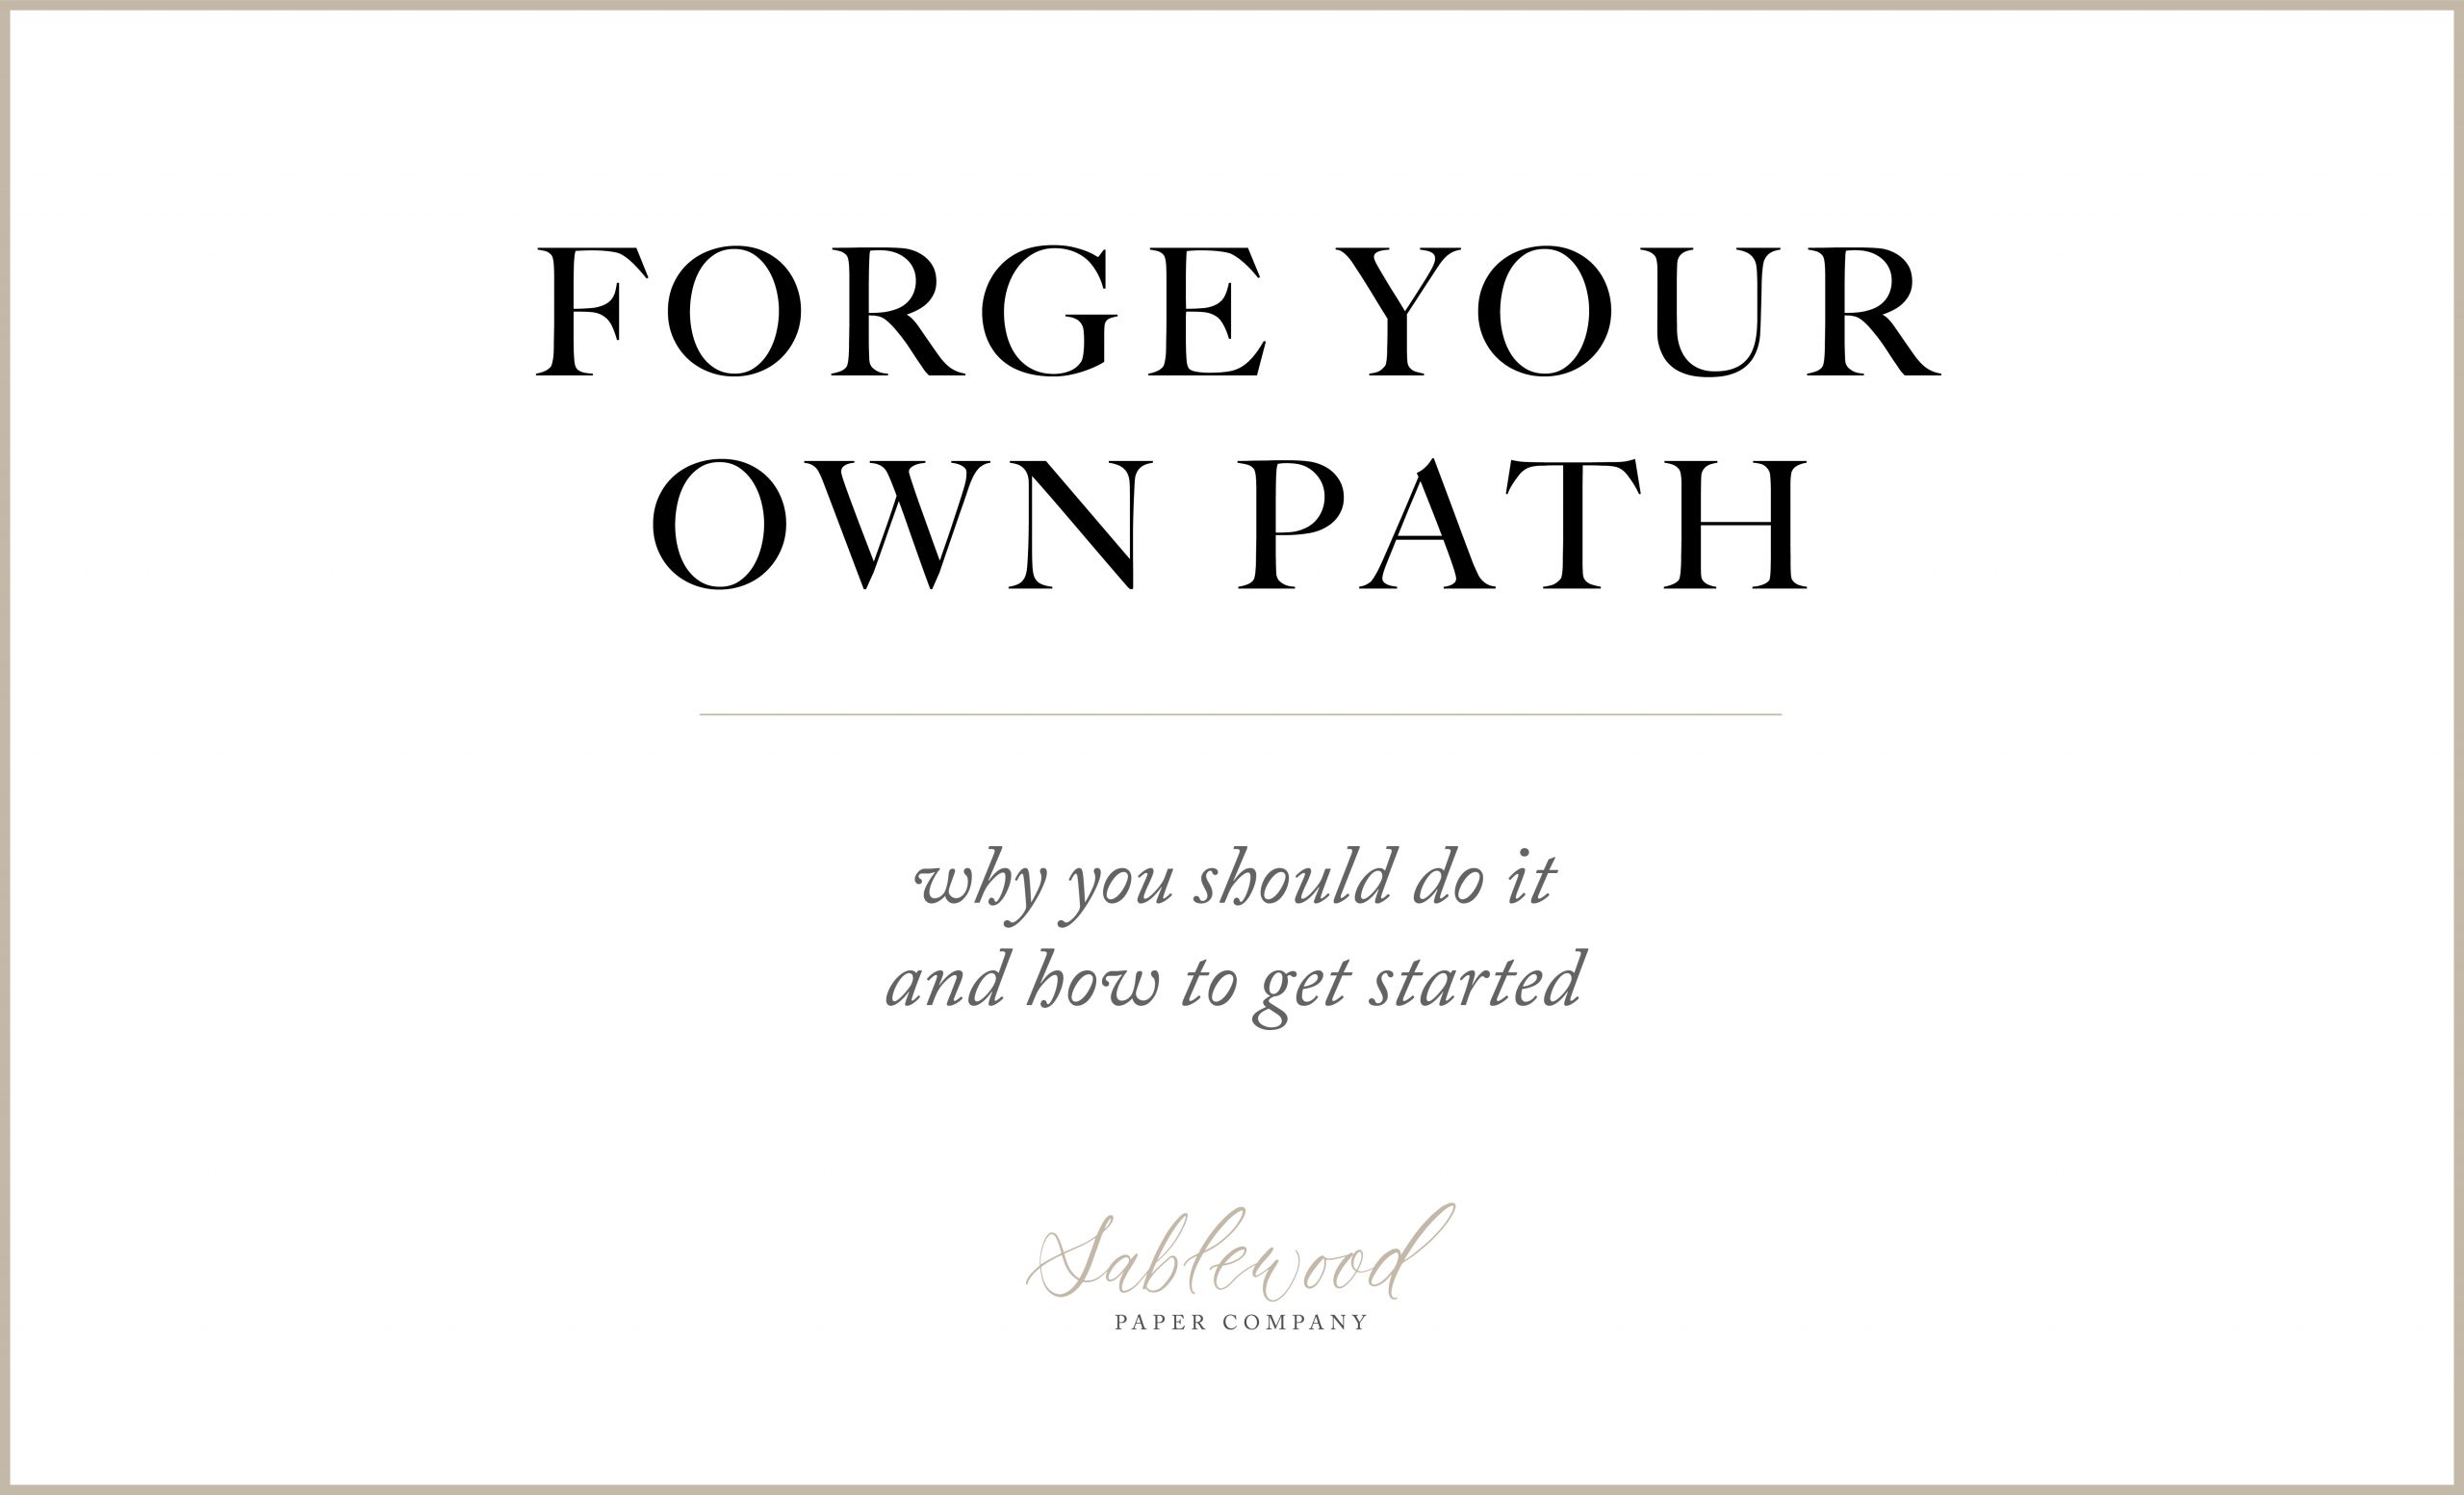 On The Blog: Forge Your Own Path